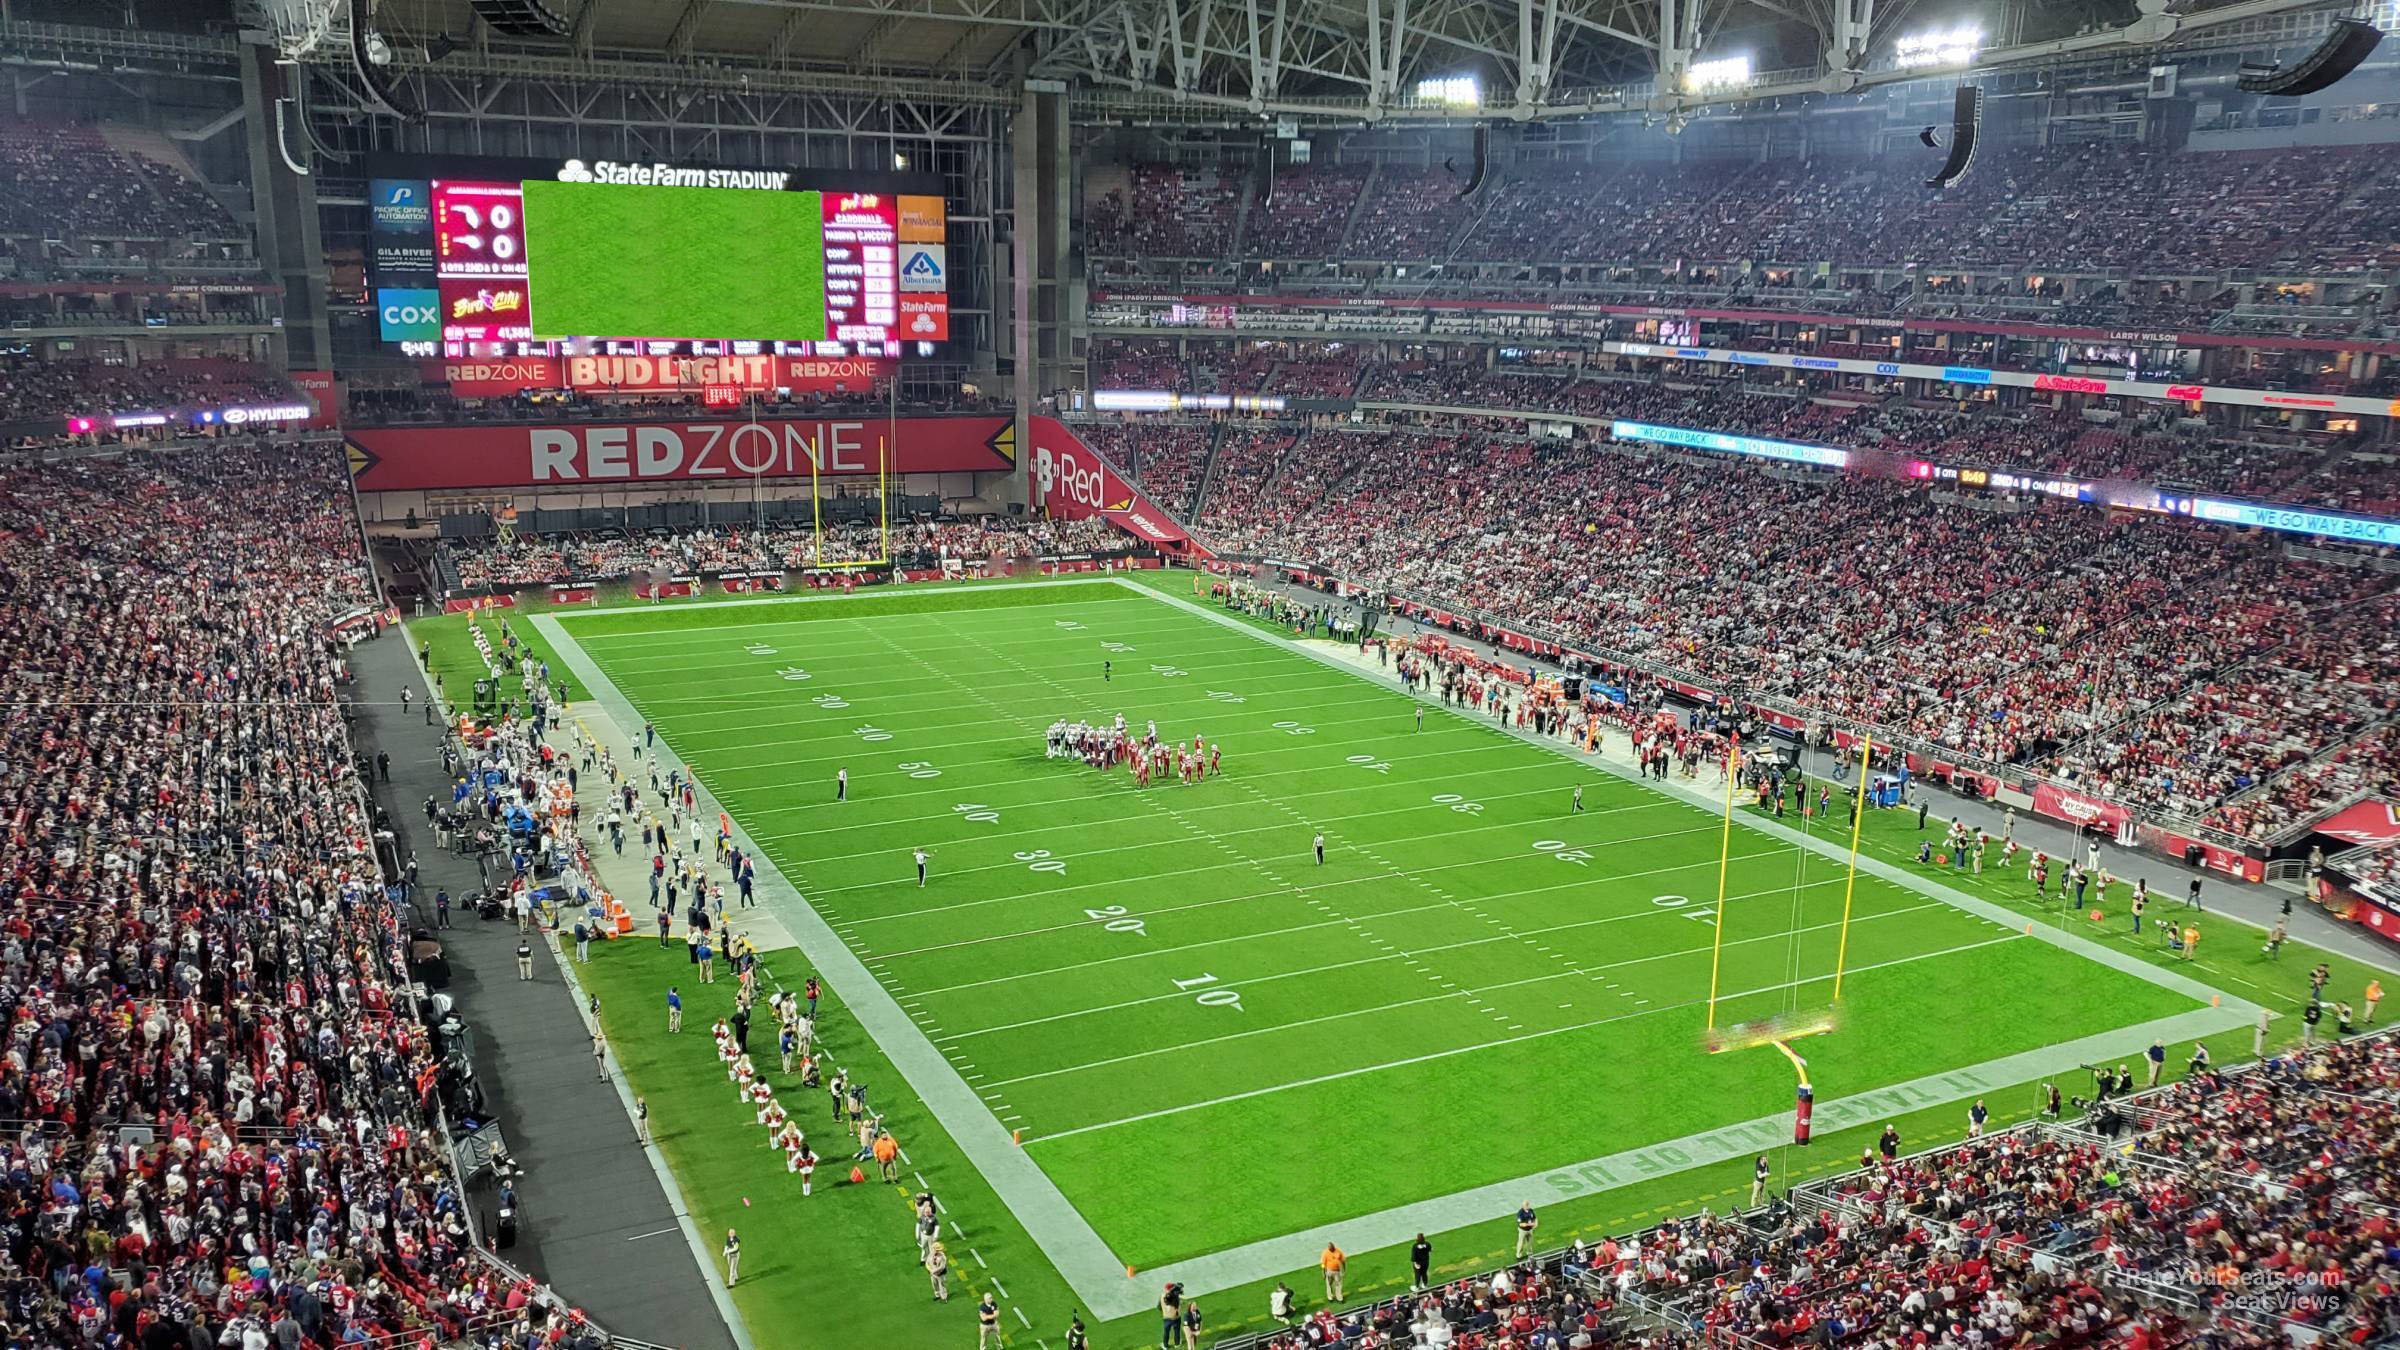 section 432, row 1 seat view  for football - state farm stadium